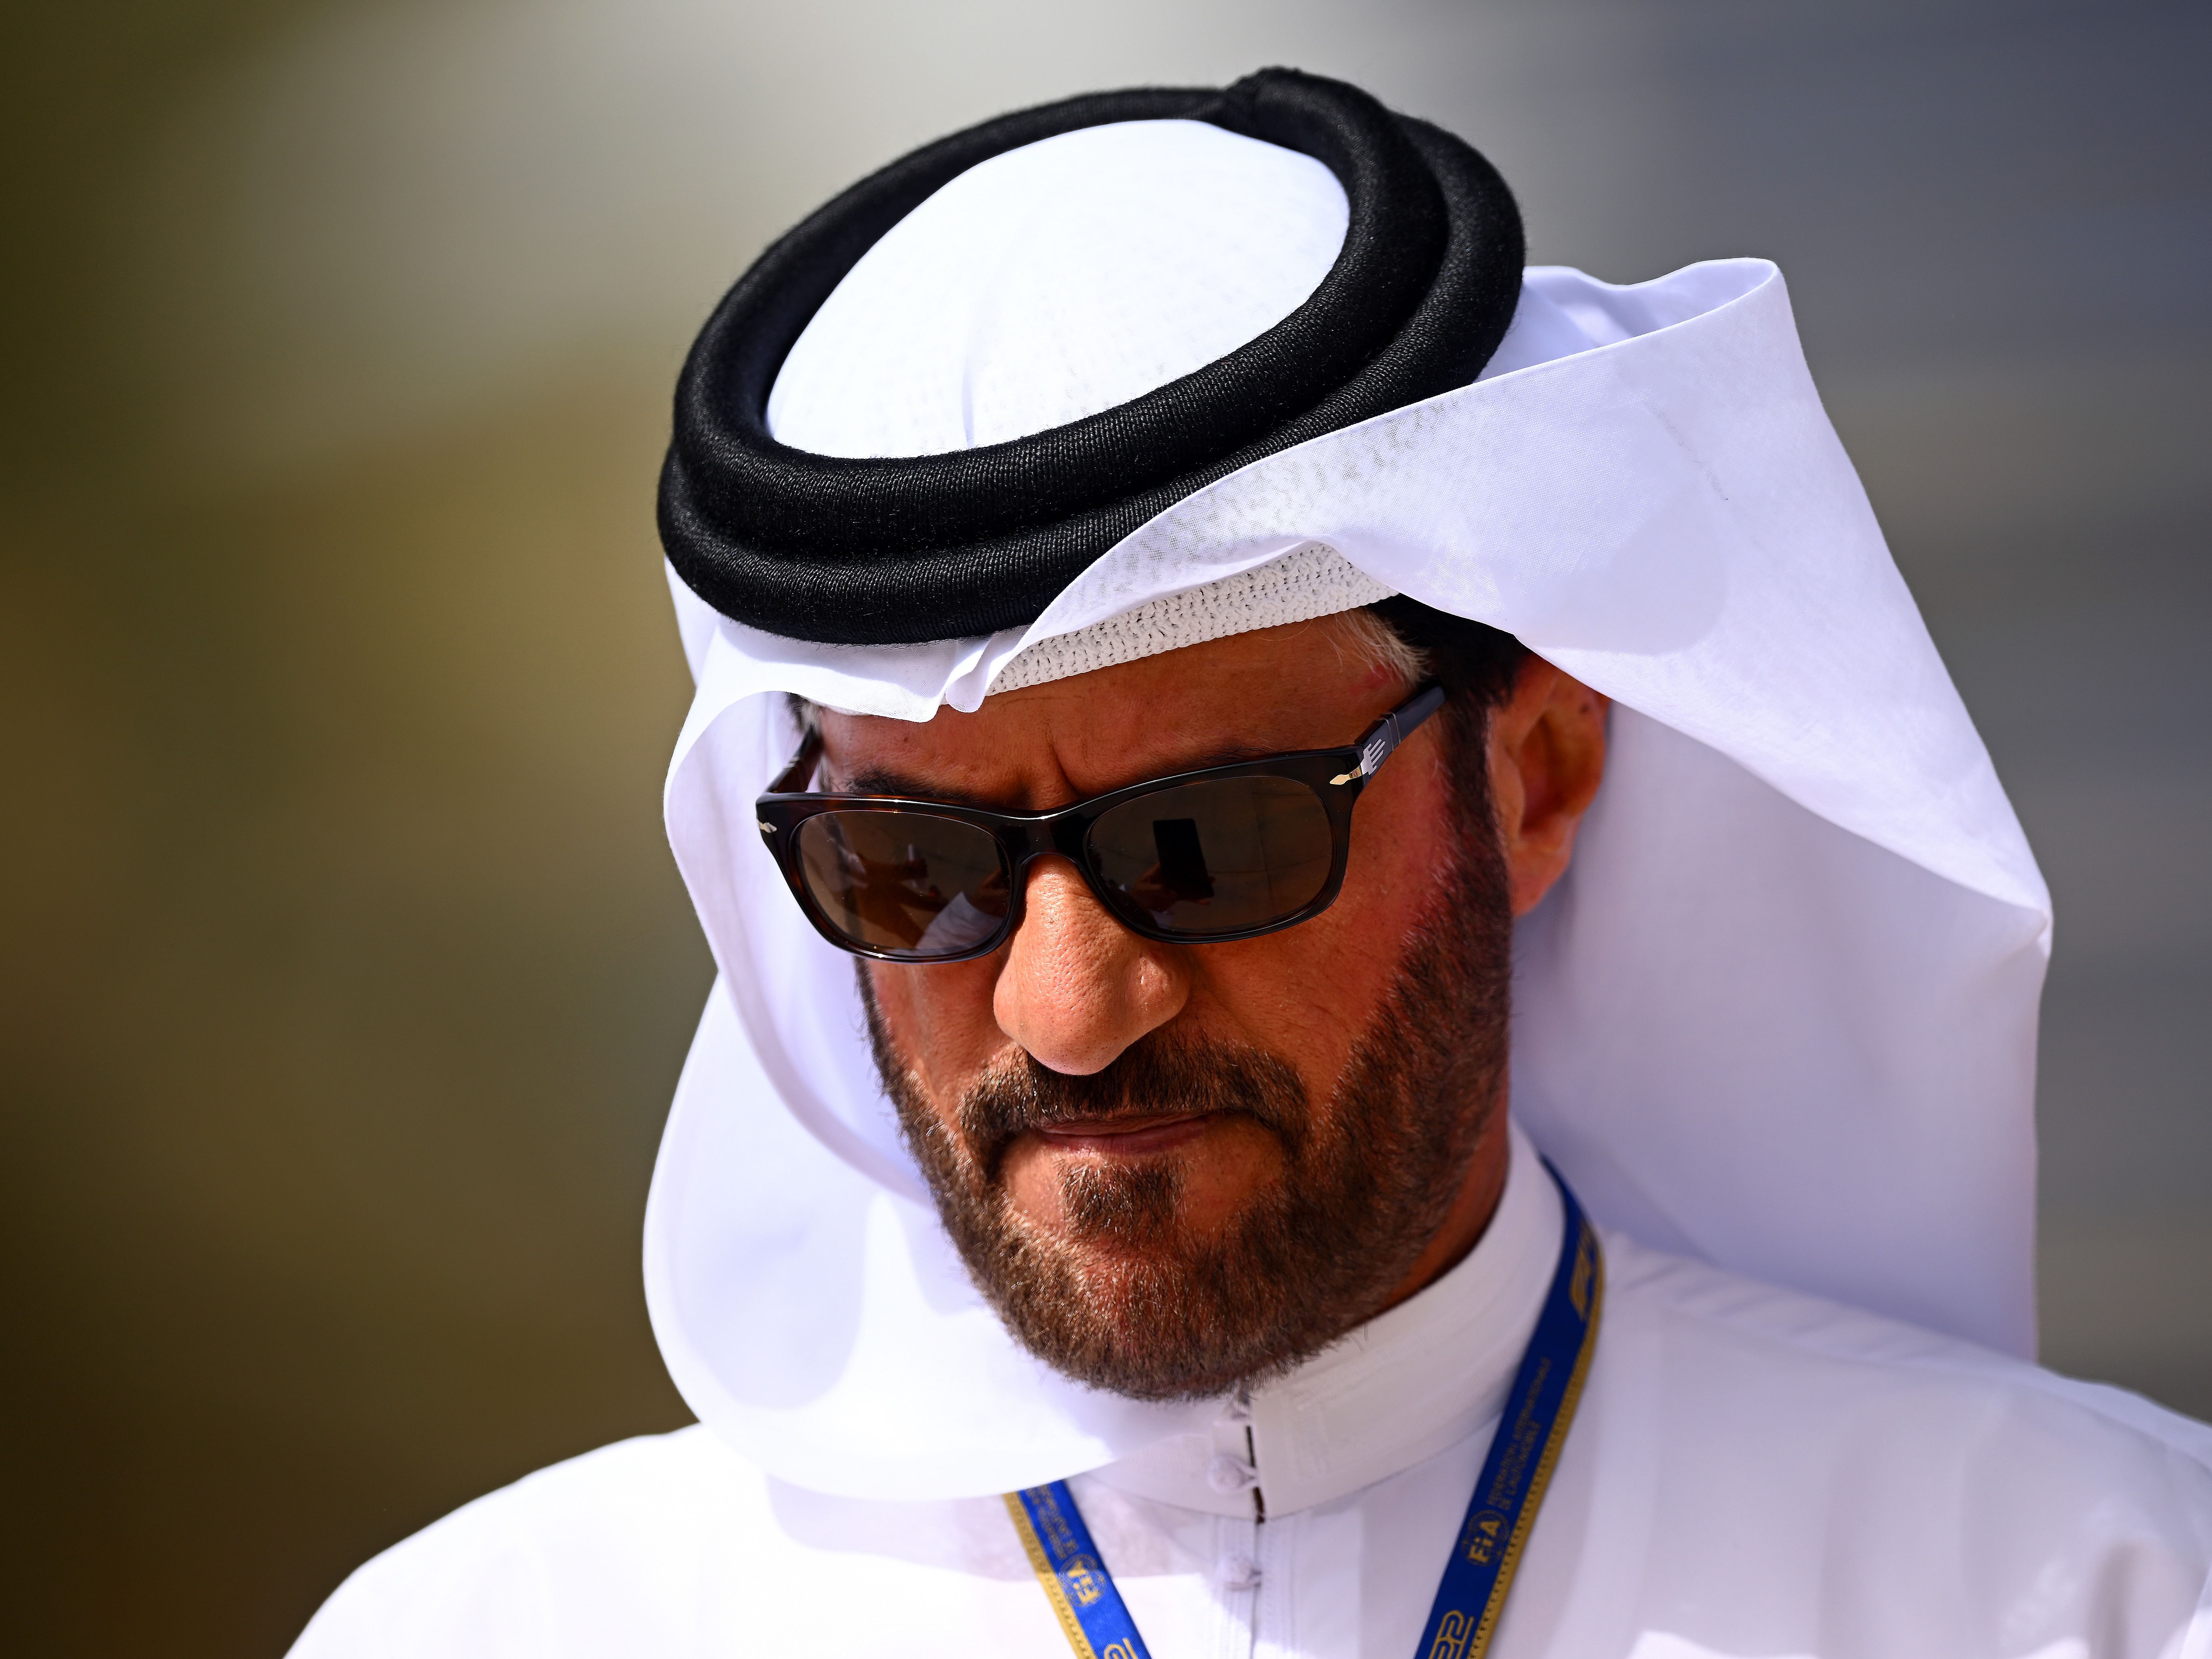 Mohammed Ben Sulayem, FIA President, walks in the paddock before the 2022 F1 Bahrain Grand Prix. (Photo by Clive Mason/Getty Images)